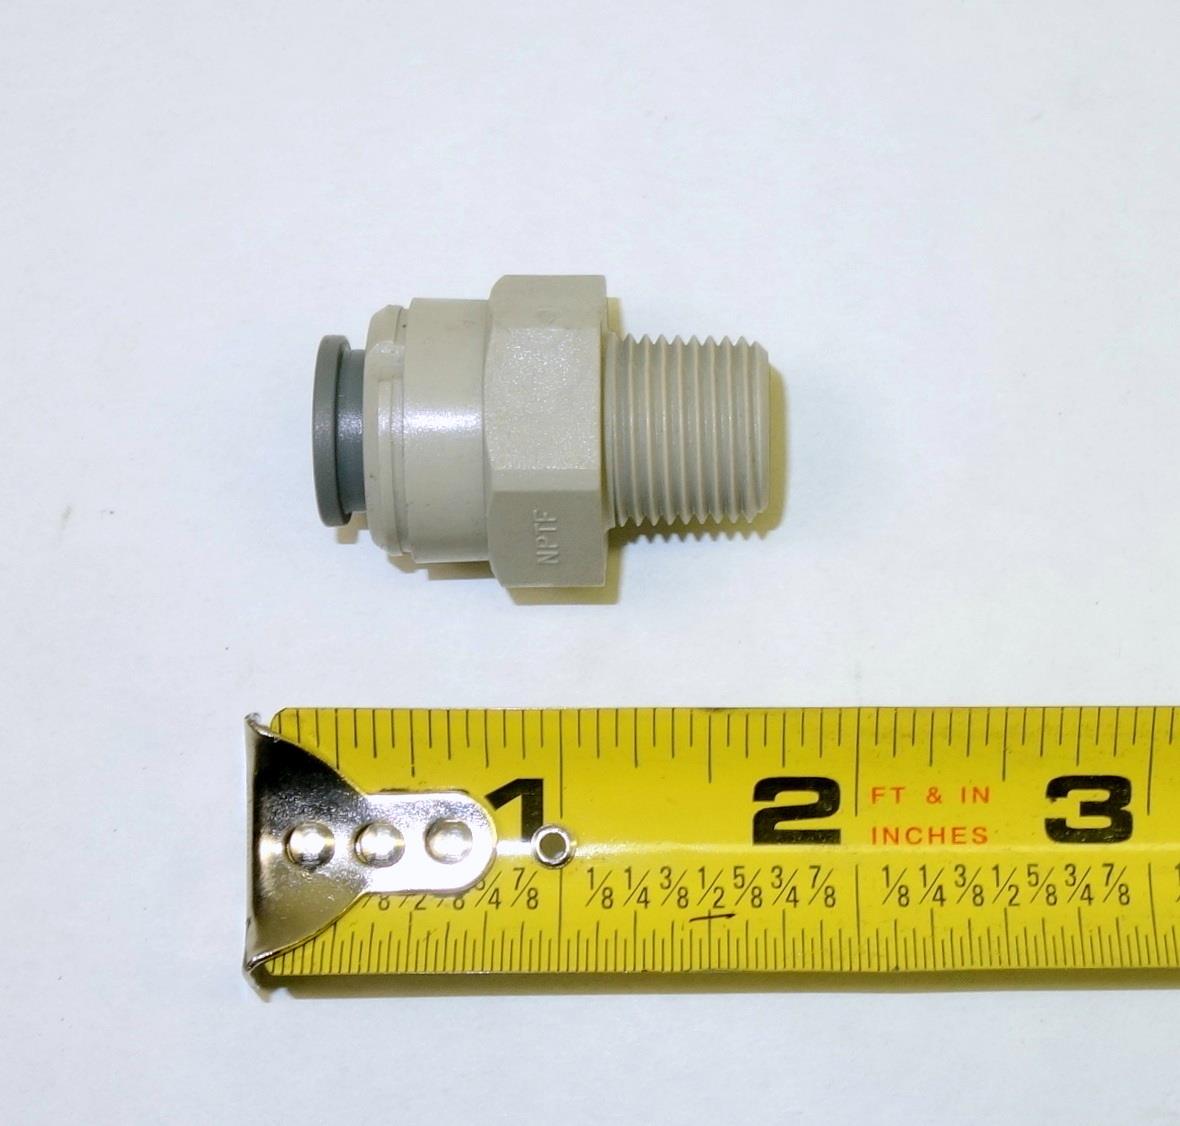 MA3-679 | 4730-01-399-0896 CTIS Airline Fitting for M35A3 Series NOS (2).JPG